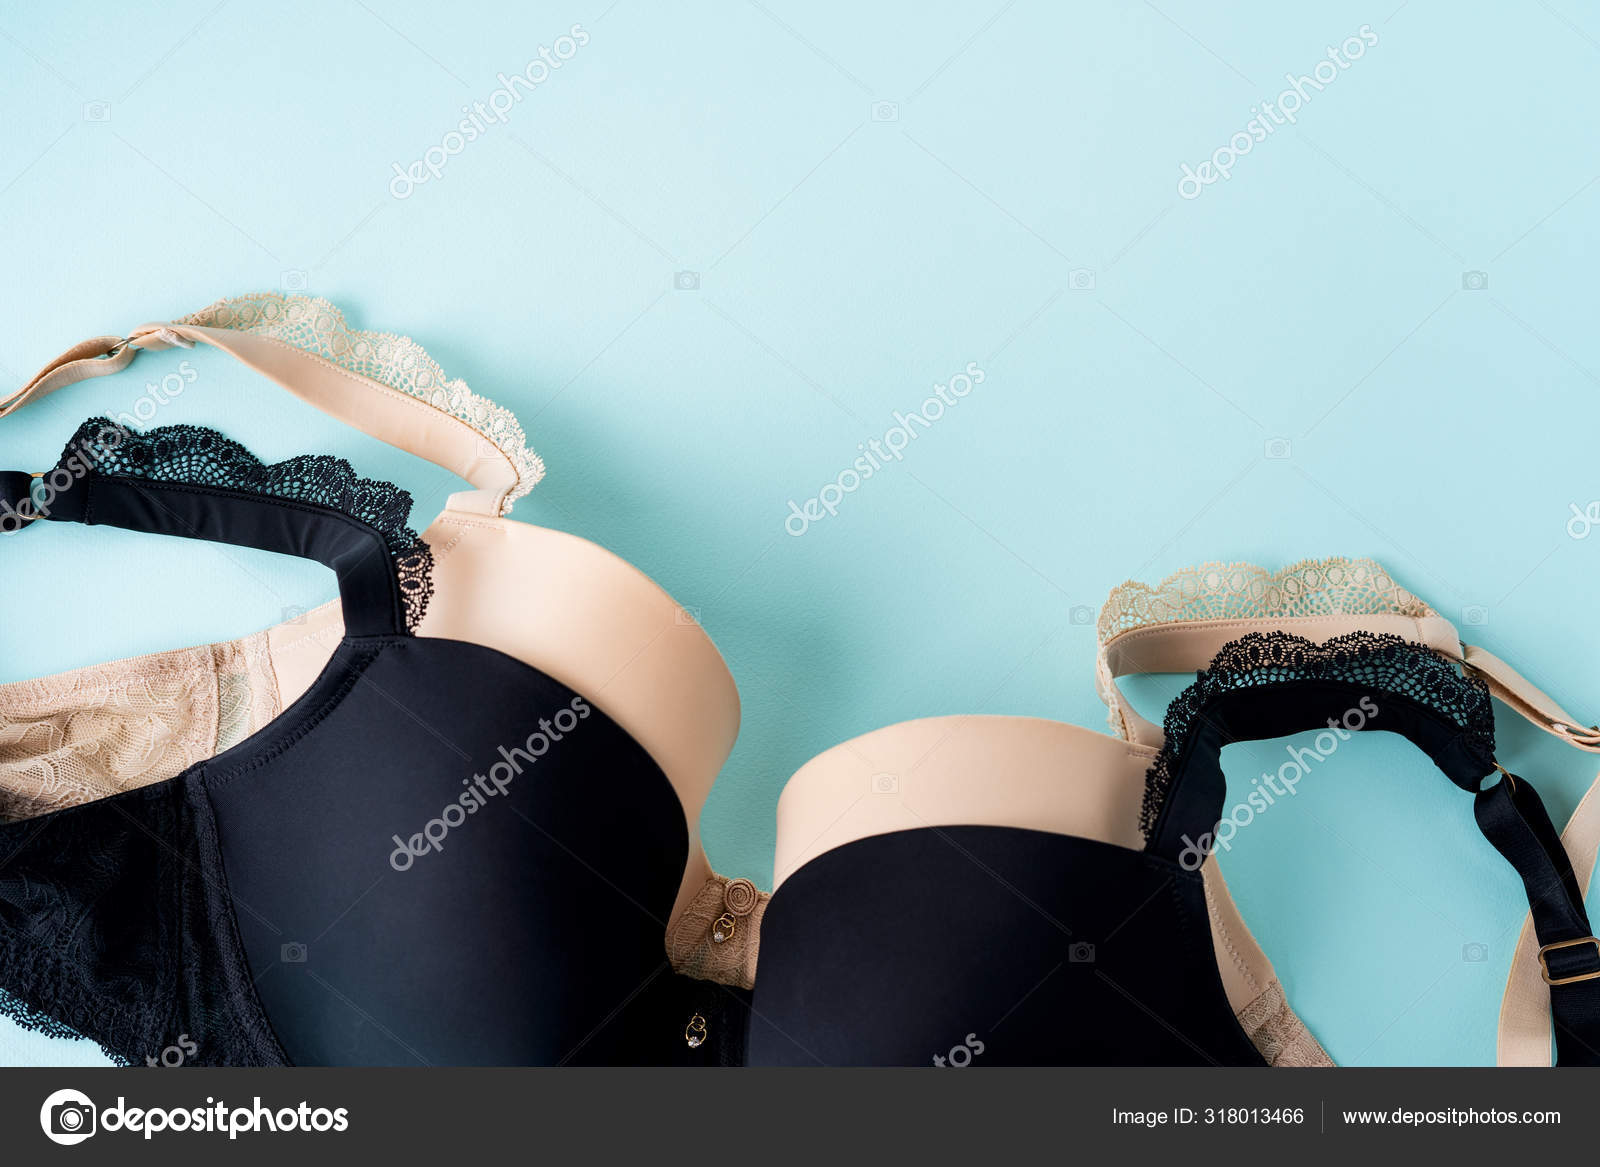 Top Fashionable Women's Brassiere Beige Black Color Turquoise Background Stock Photo by ©pinkasevich 318013466